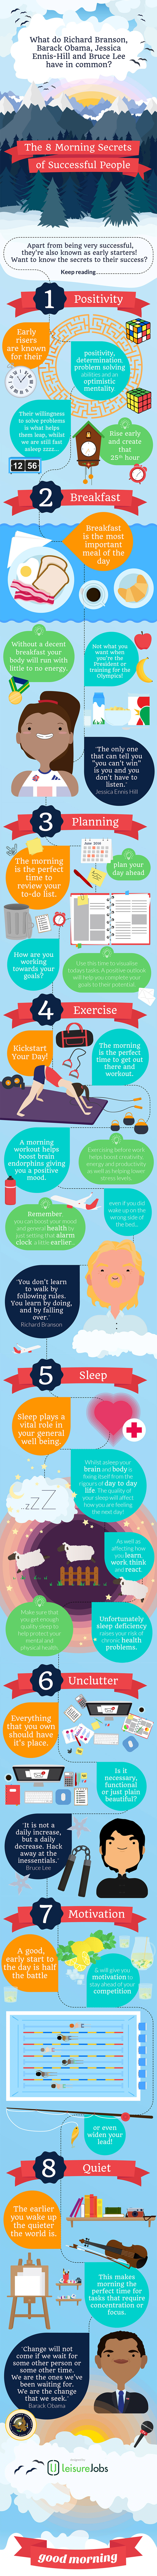 1475851538_8-morning-secrets-successful-people-infographic